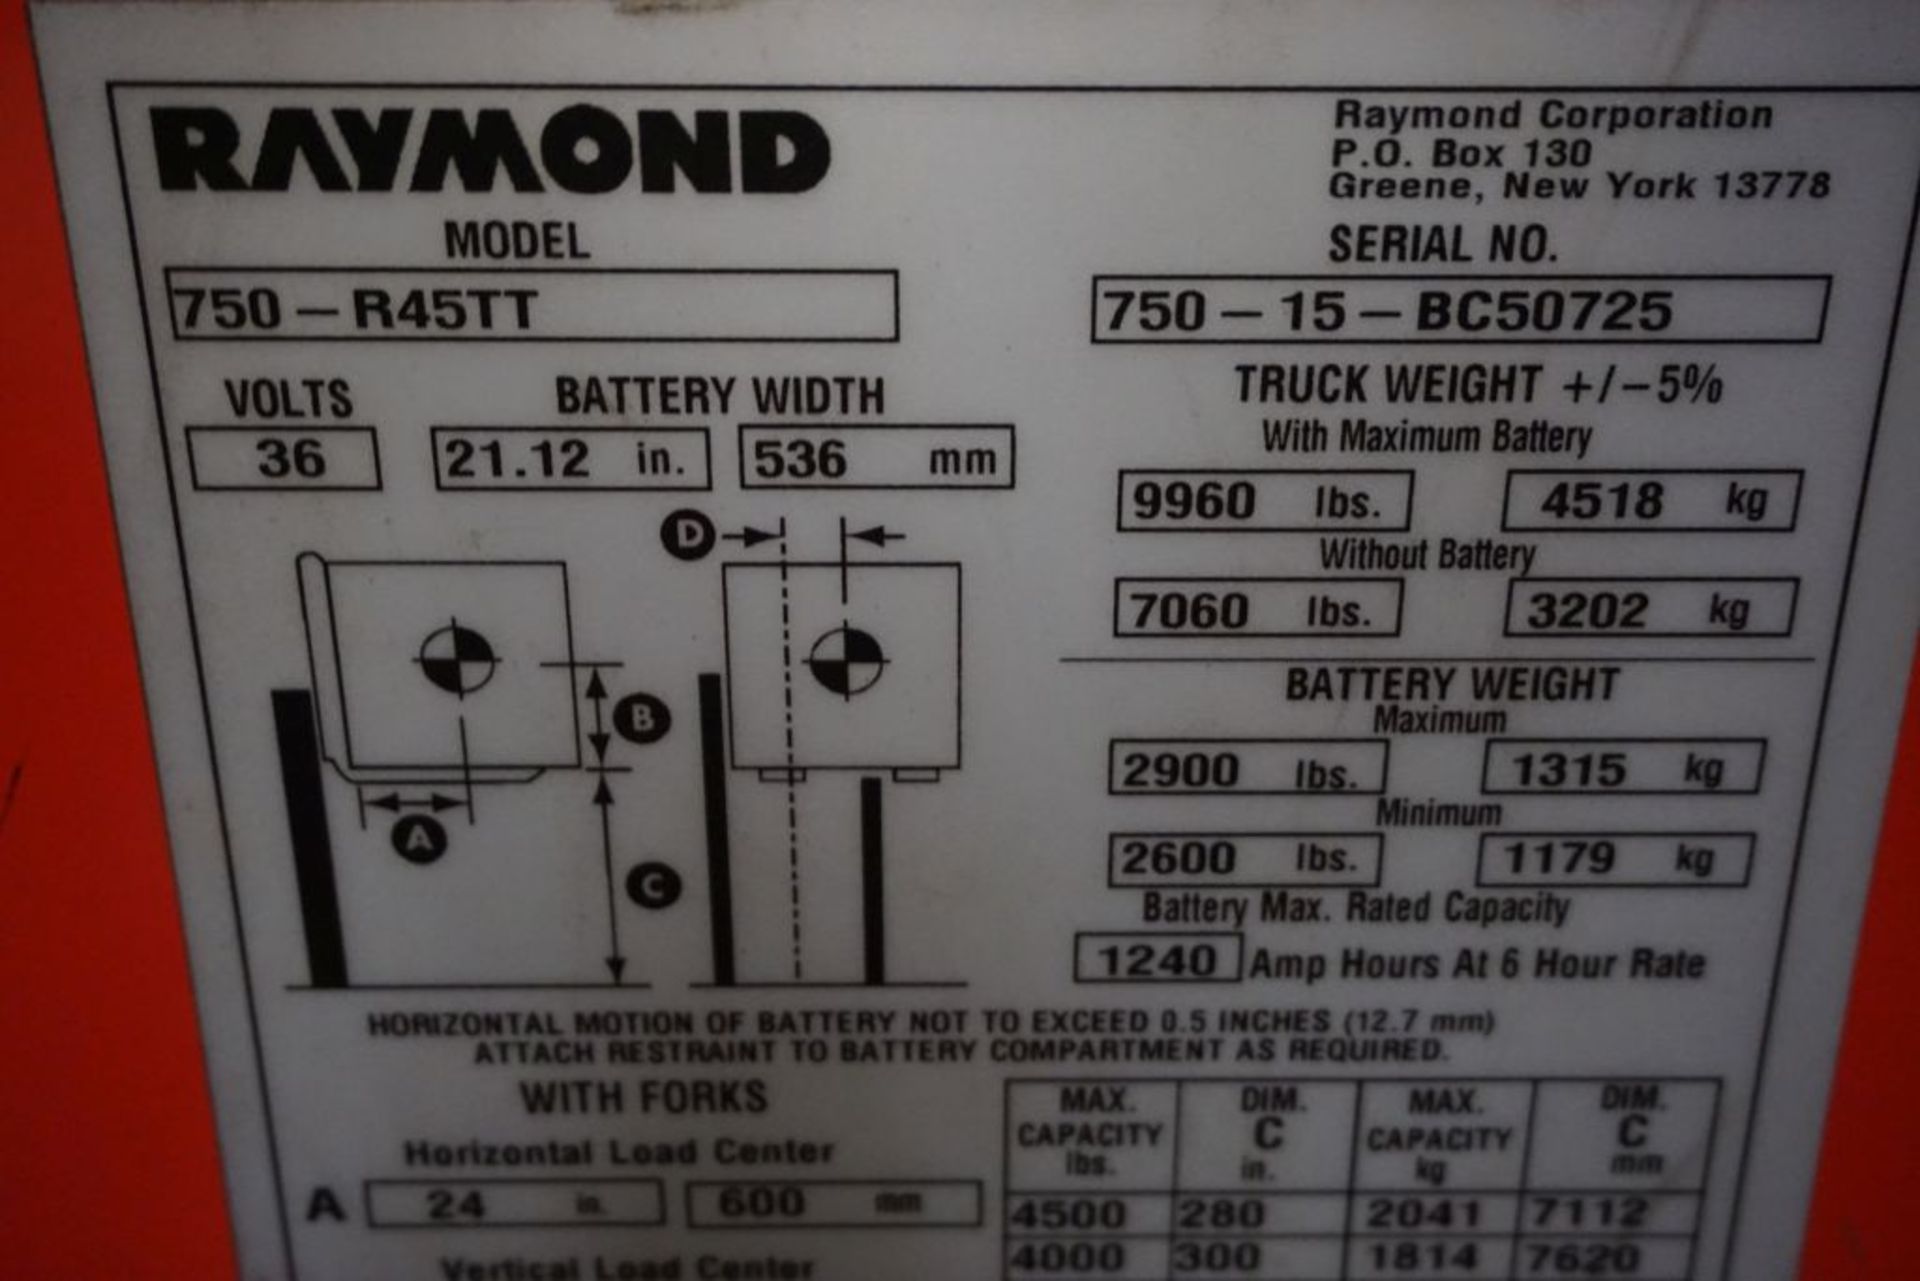 Raymond 7500 Universal Stance Reach Forklift - Model No. 750-R45TT; Serial No. 750-15-BC50725; - Image 17 of 19